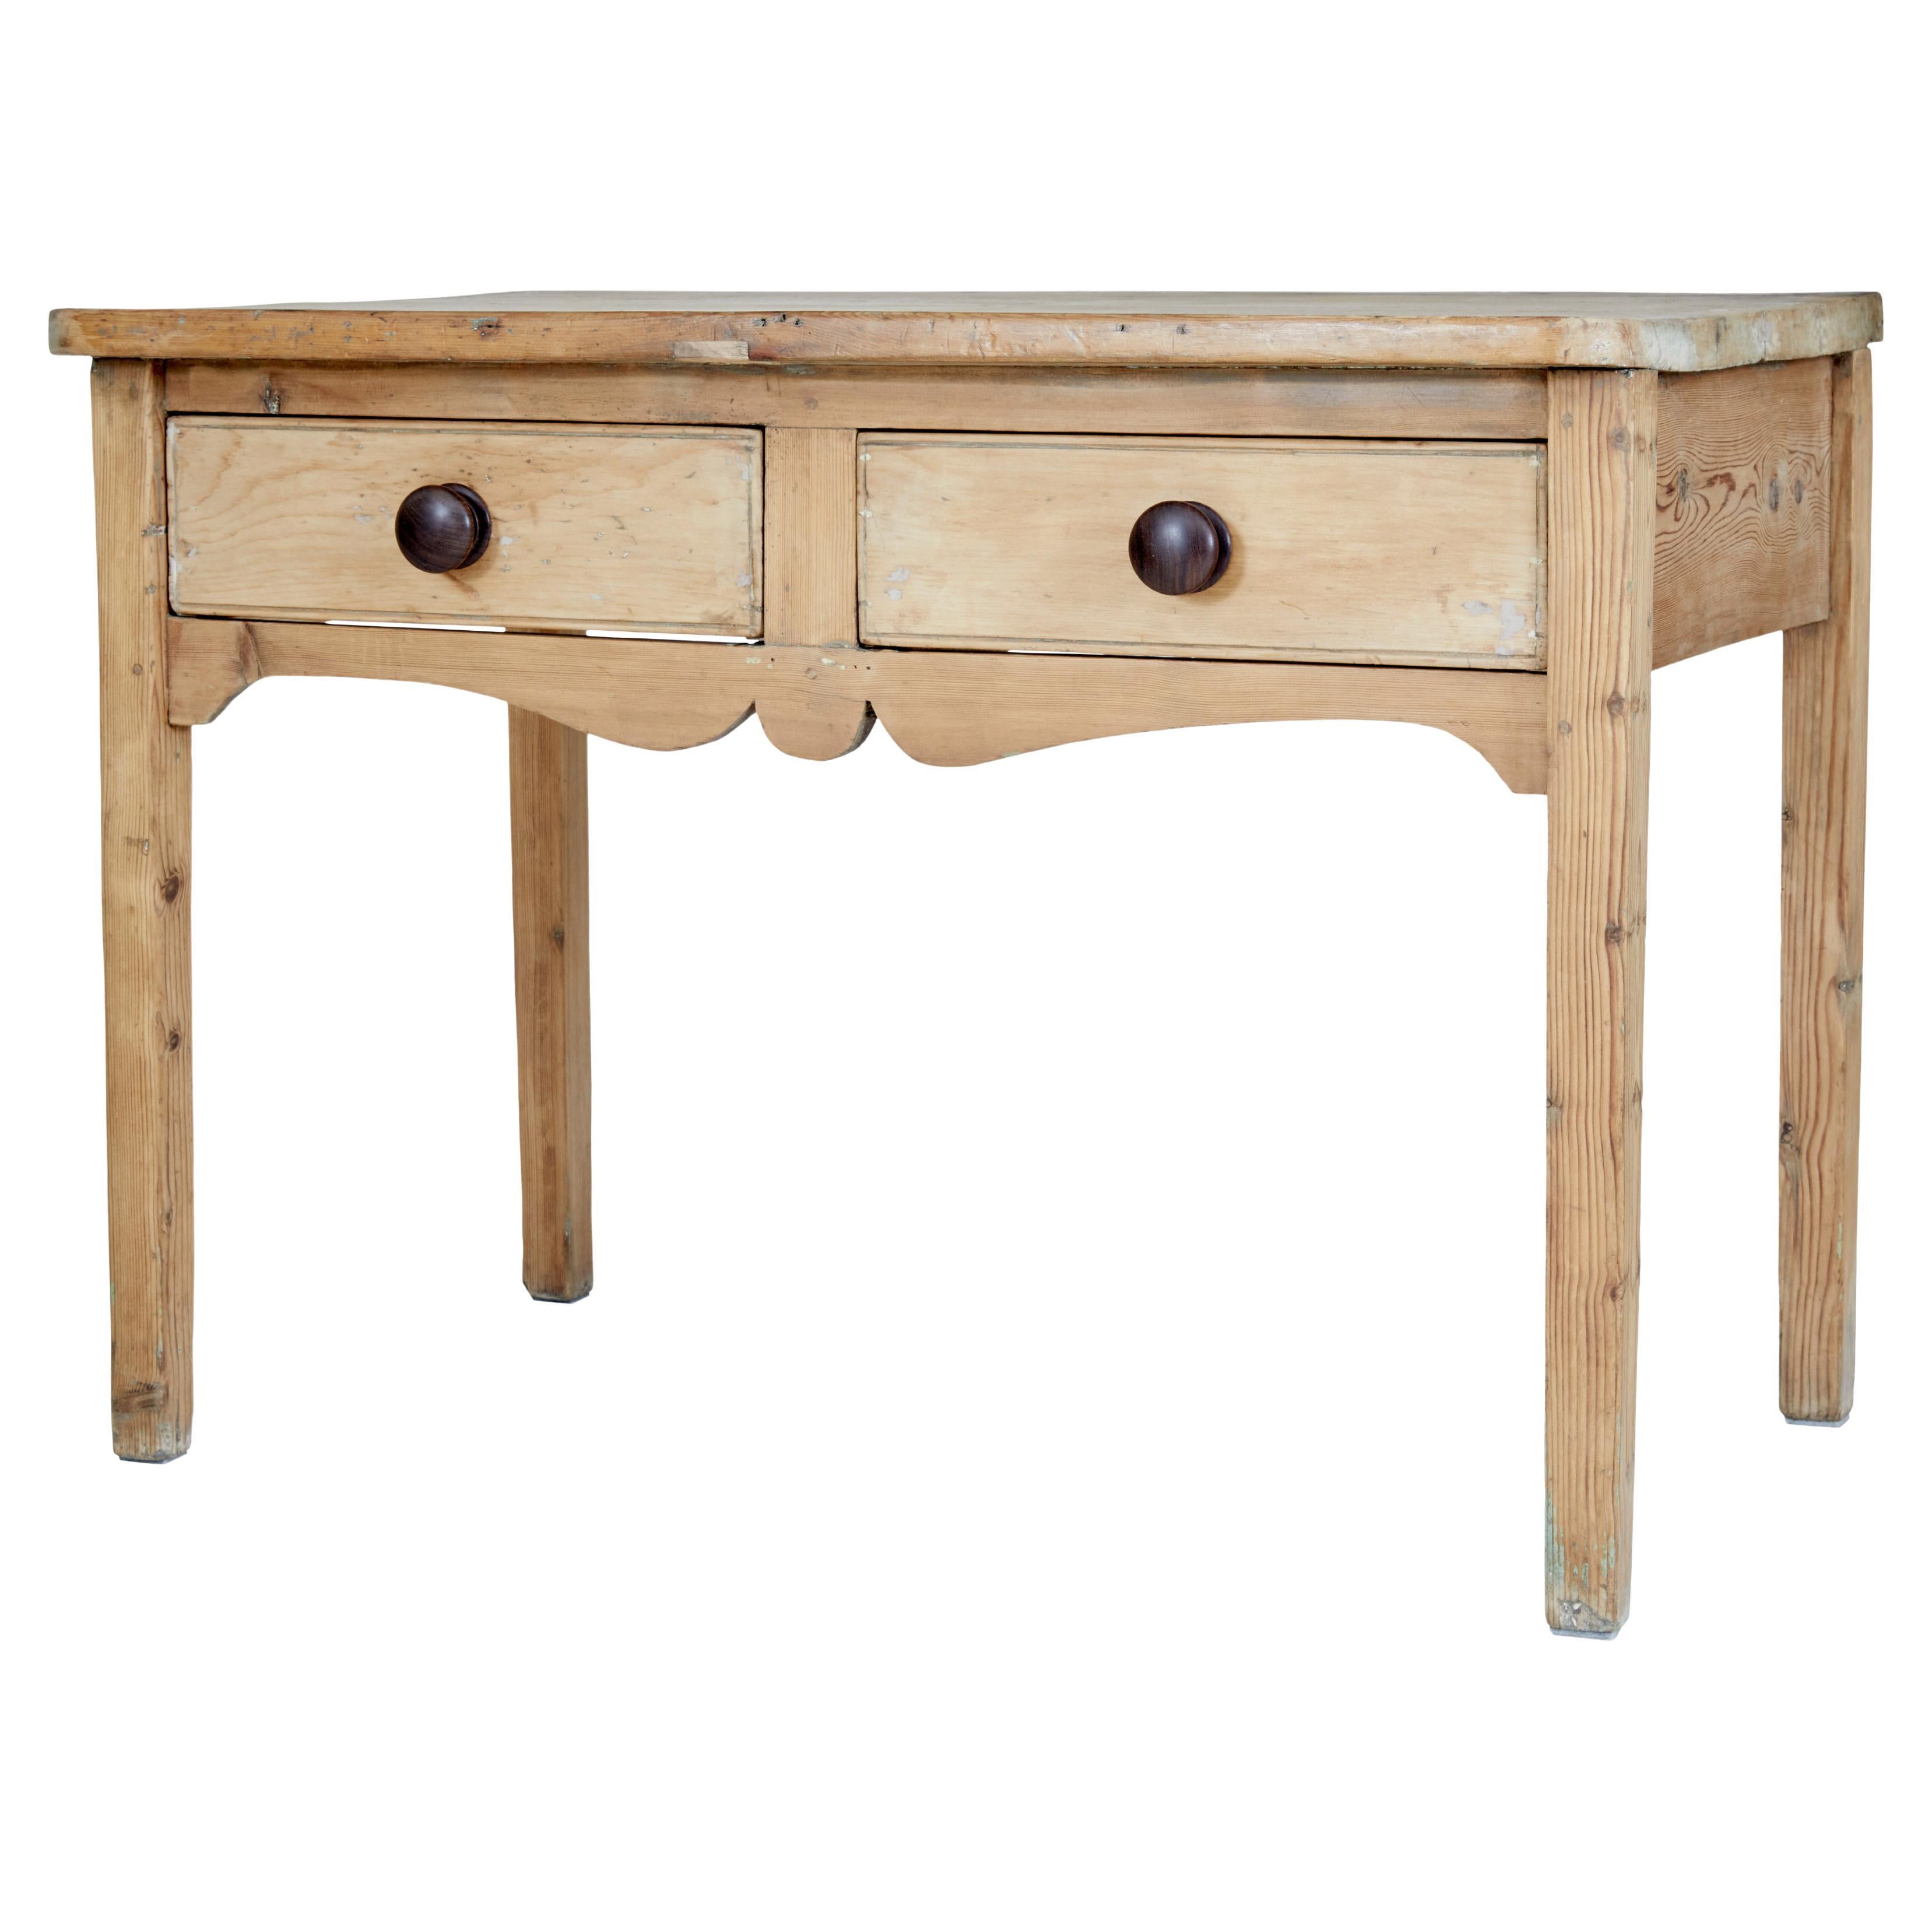 Rustic 19th Century Victorian Pine Kitchen Table